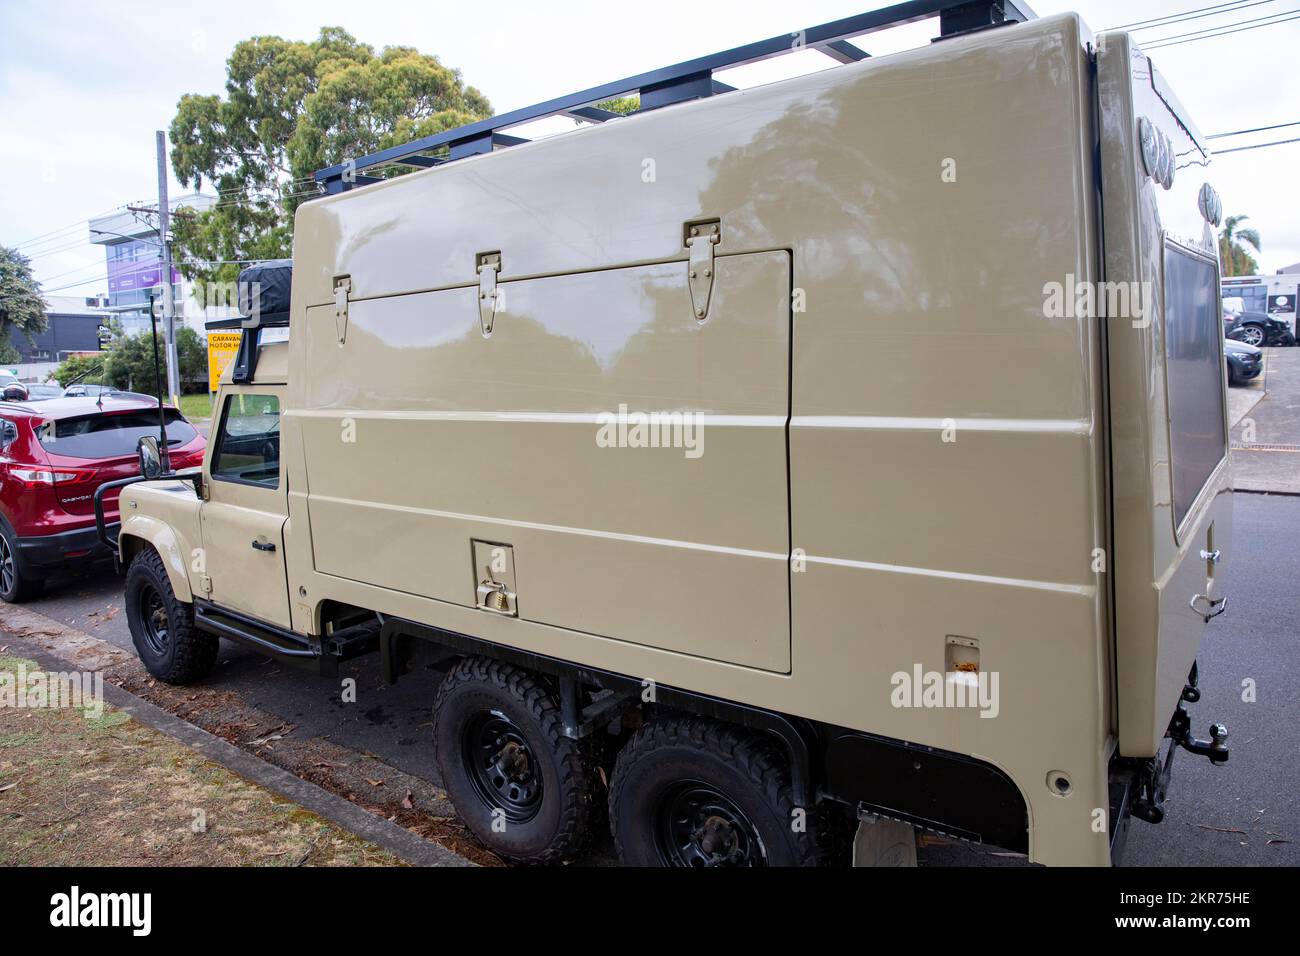 Heavily modified And Rover Defender transformed into a 6 six wheel heavy goods vehicle truck,Mona Vale,Sydney,NSW,Australia Stock Photo